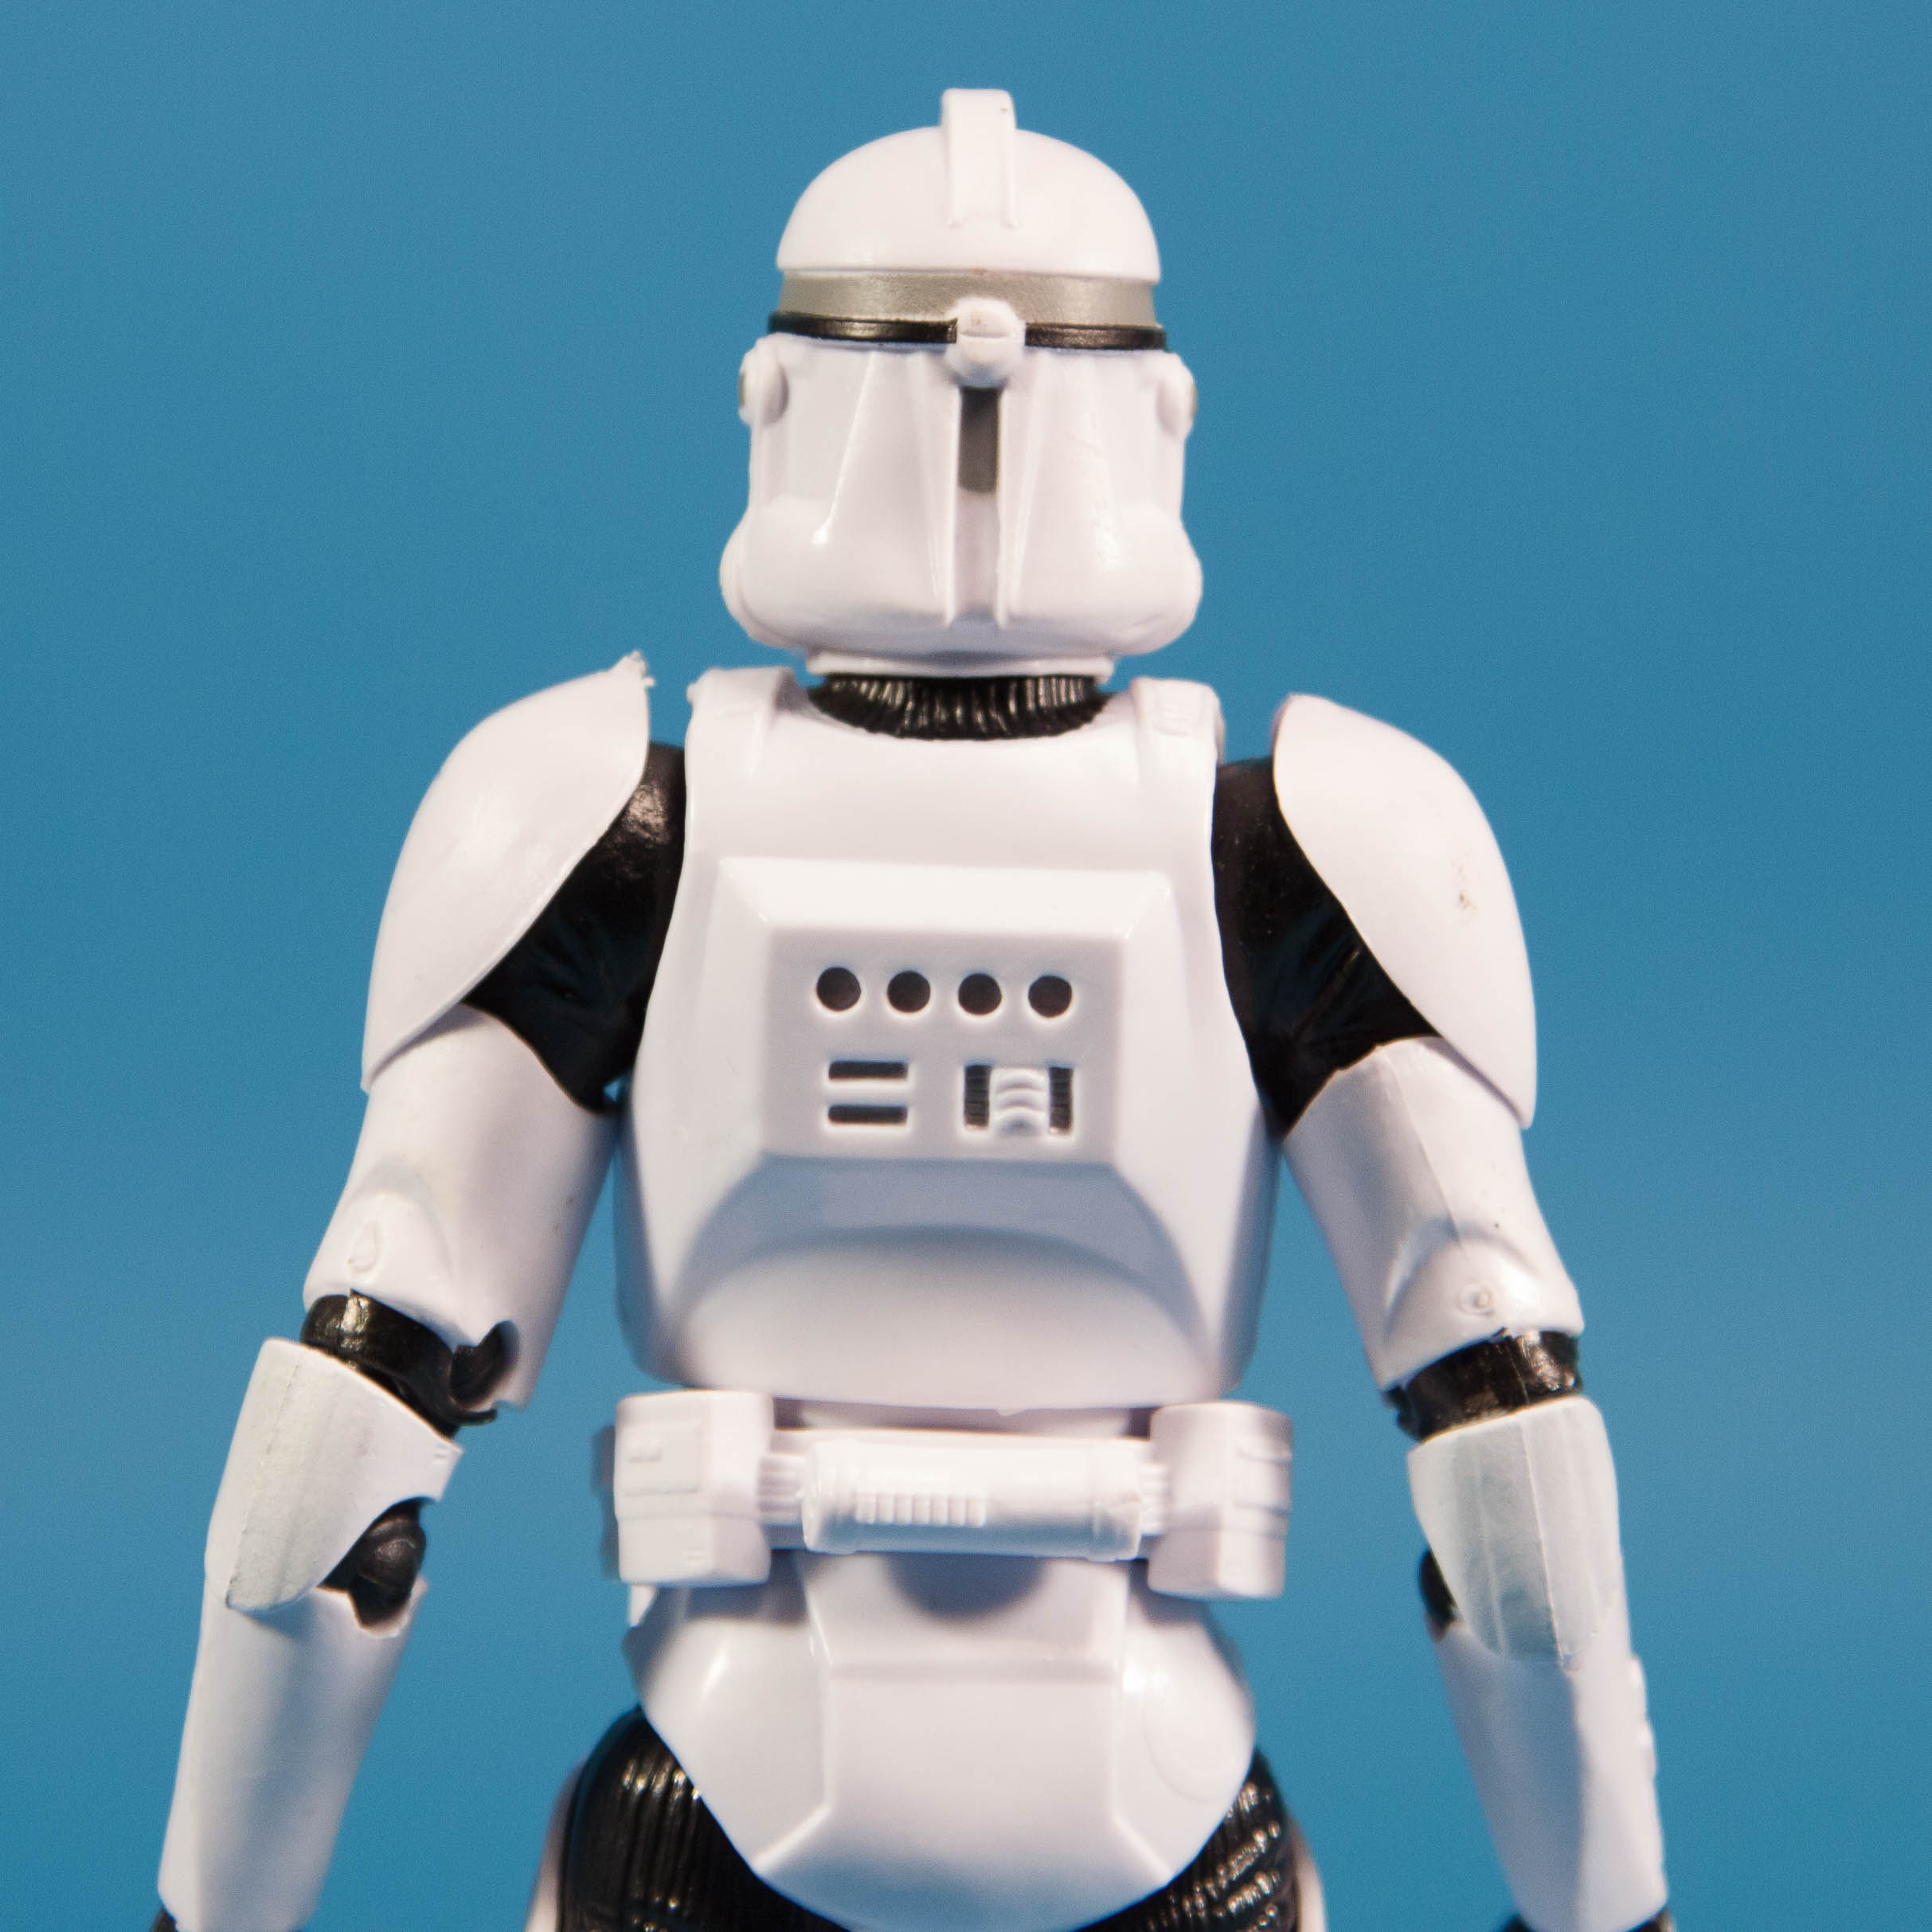 stormtrooper-collection-6-inch-4-pack-amazon-exclusive-019.jpg